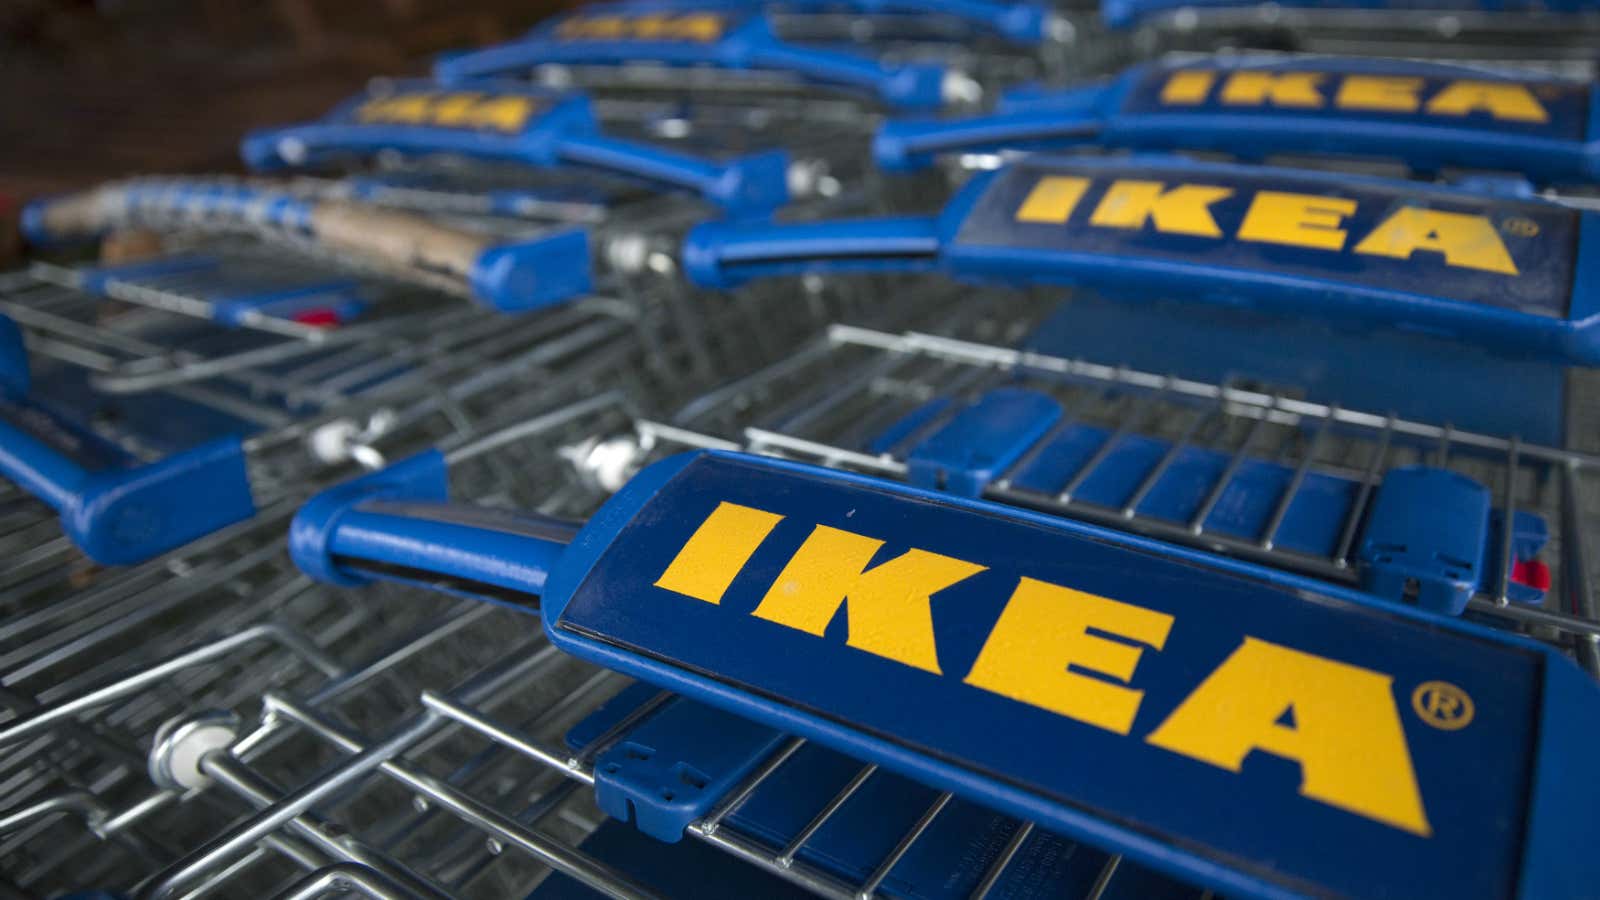 Trollies are seen outside an IKEA store in Wembley, north London January 28, 2015. IKEA Group, the world’s biggest furniture retailer, posted on Wednesday a…